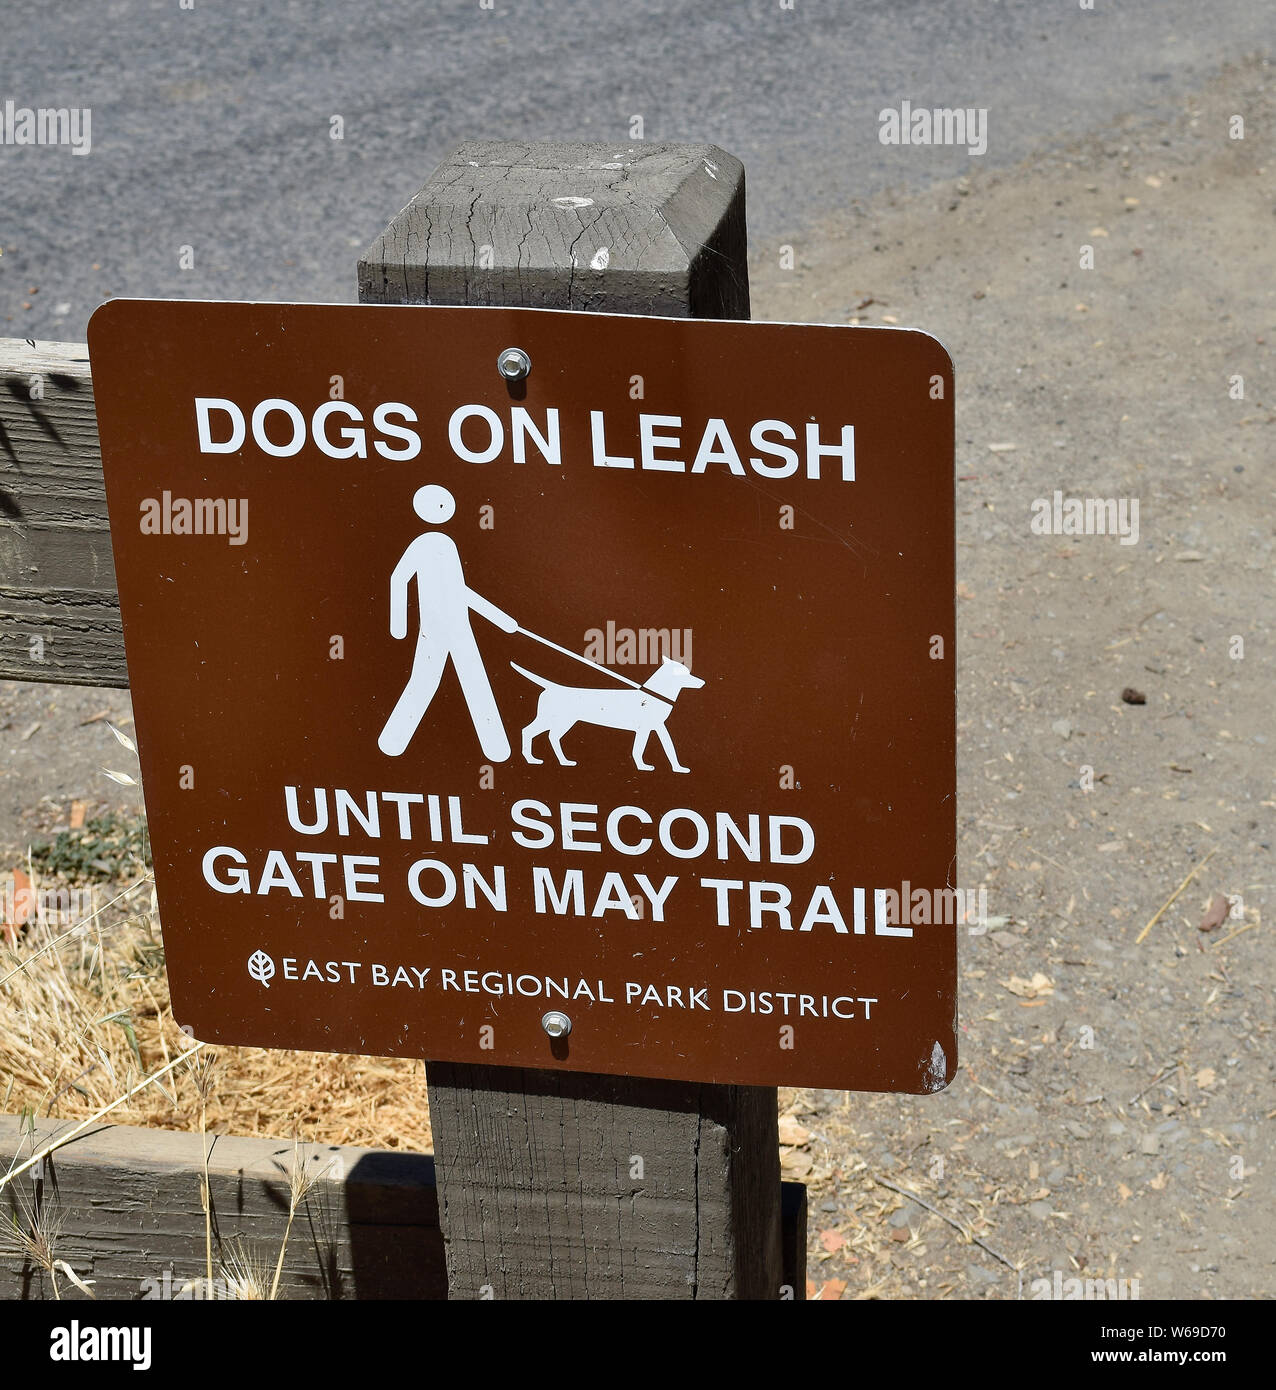 Dogs on leash until second gate on May trail sign n Dry Creek Pioneer Regional Park  Union City, California Stock Photo